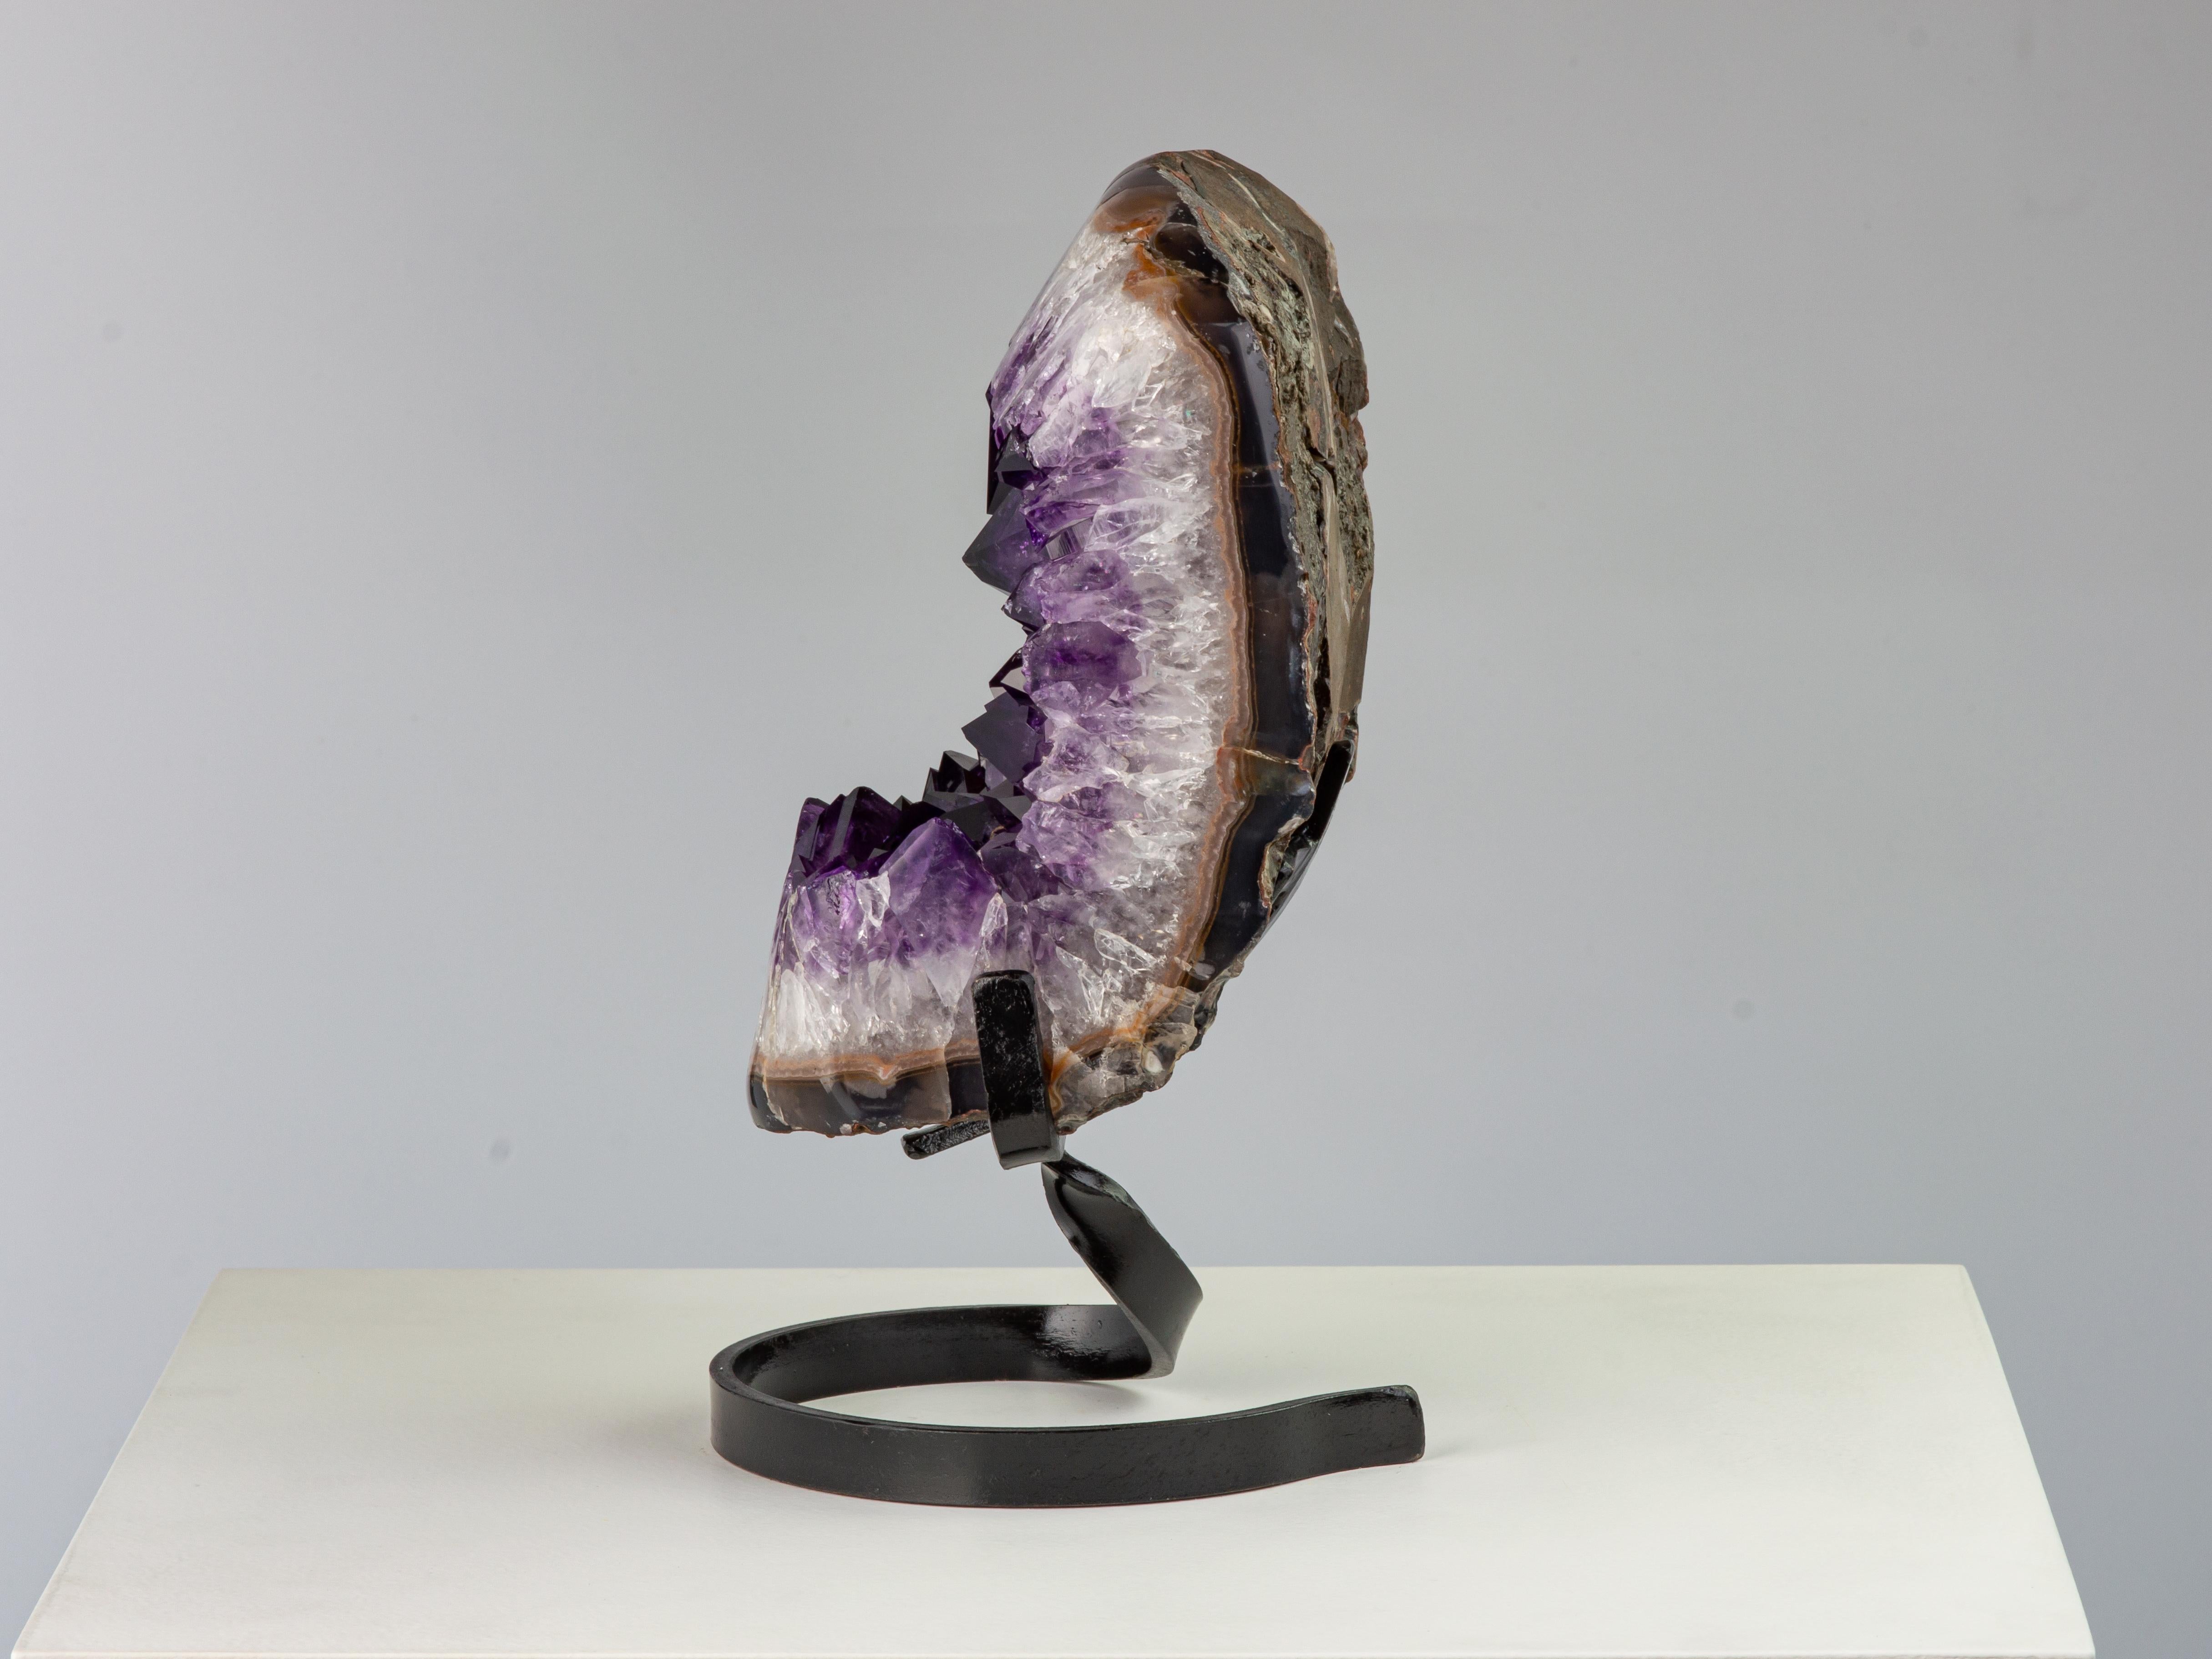 A stunning deep purple amethyst cluster with unusually high peaked crystals on metal stand. The polished frame shows mineral layers developing from the rough basalt, to the grey/blue agate, jasper, a thick layer of white quartz and finally to the